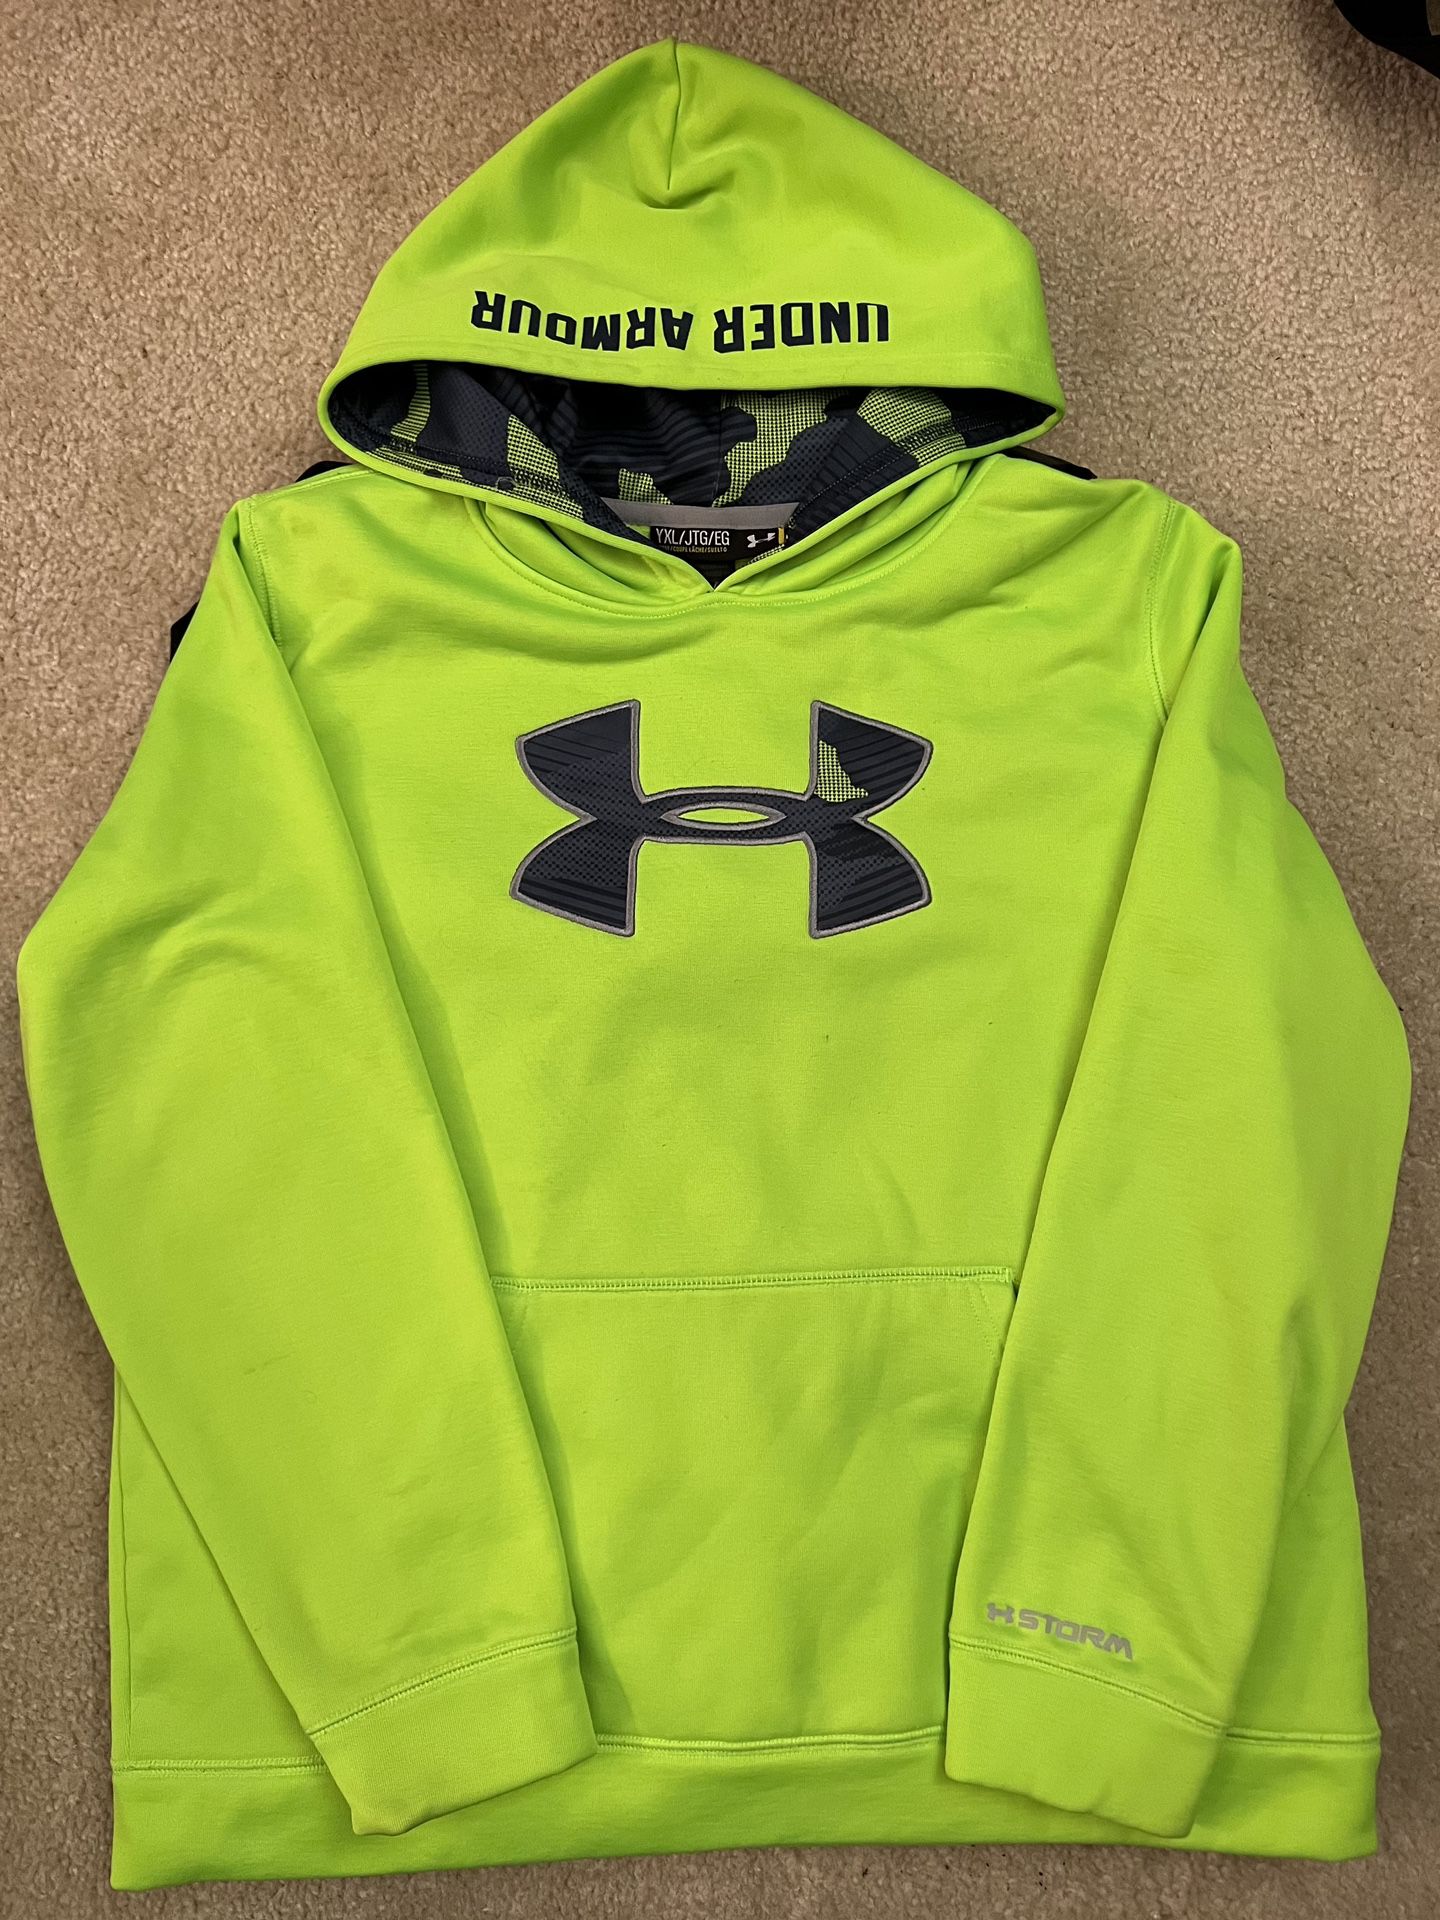 Boys Youth XL Hoodie sweater for Sale in Davenport, - OfferUp